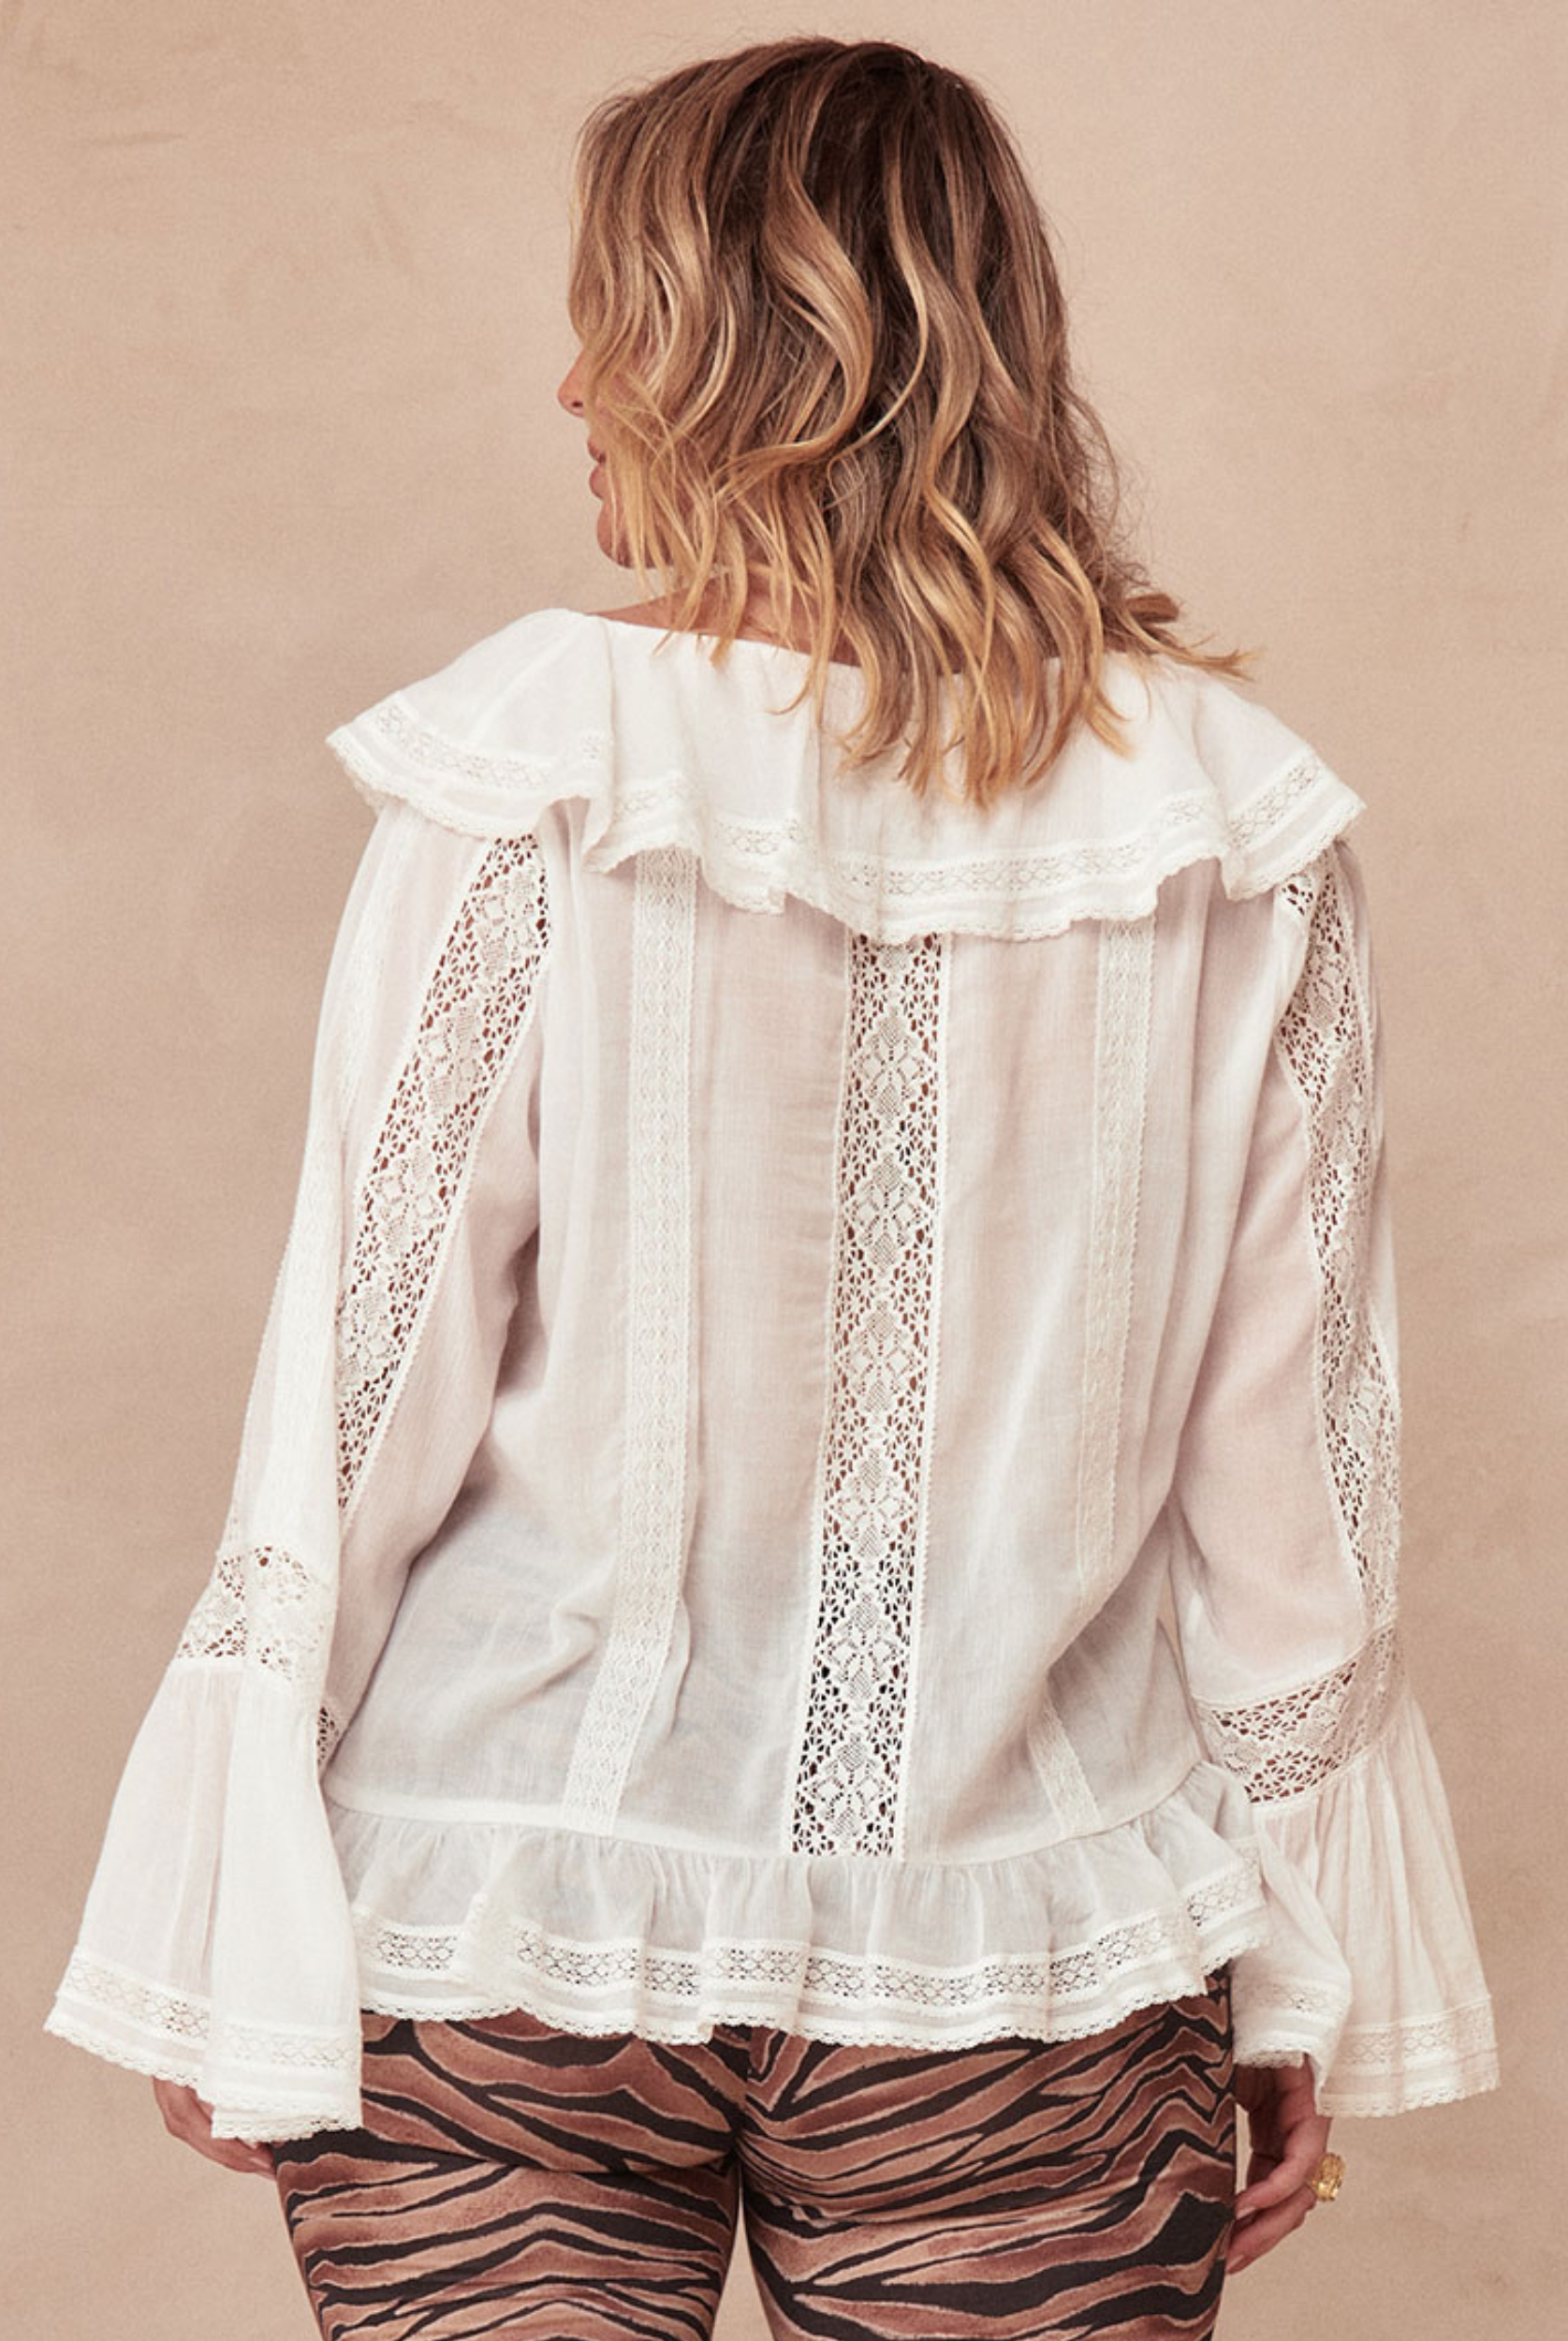 Spell Fleur Lace Frill Blouse in white